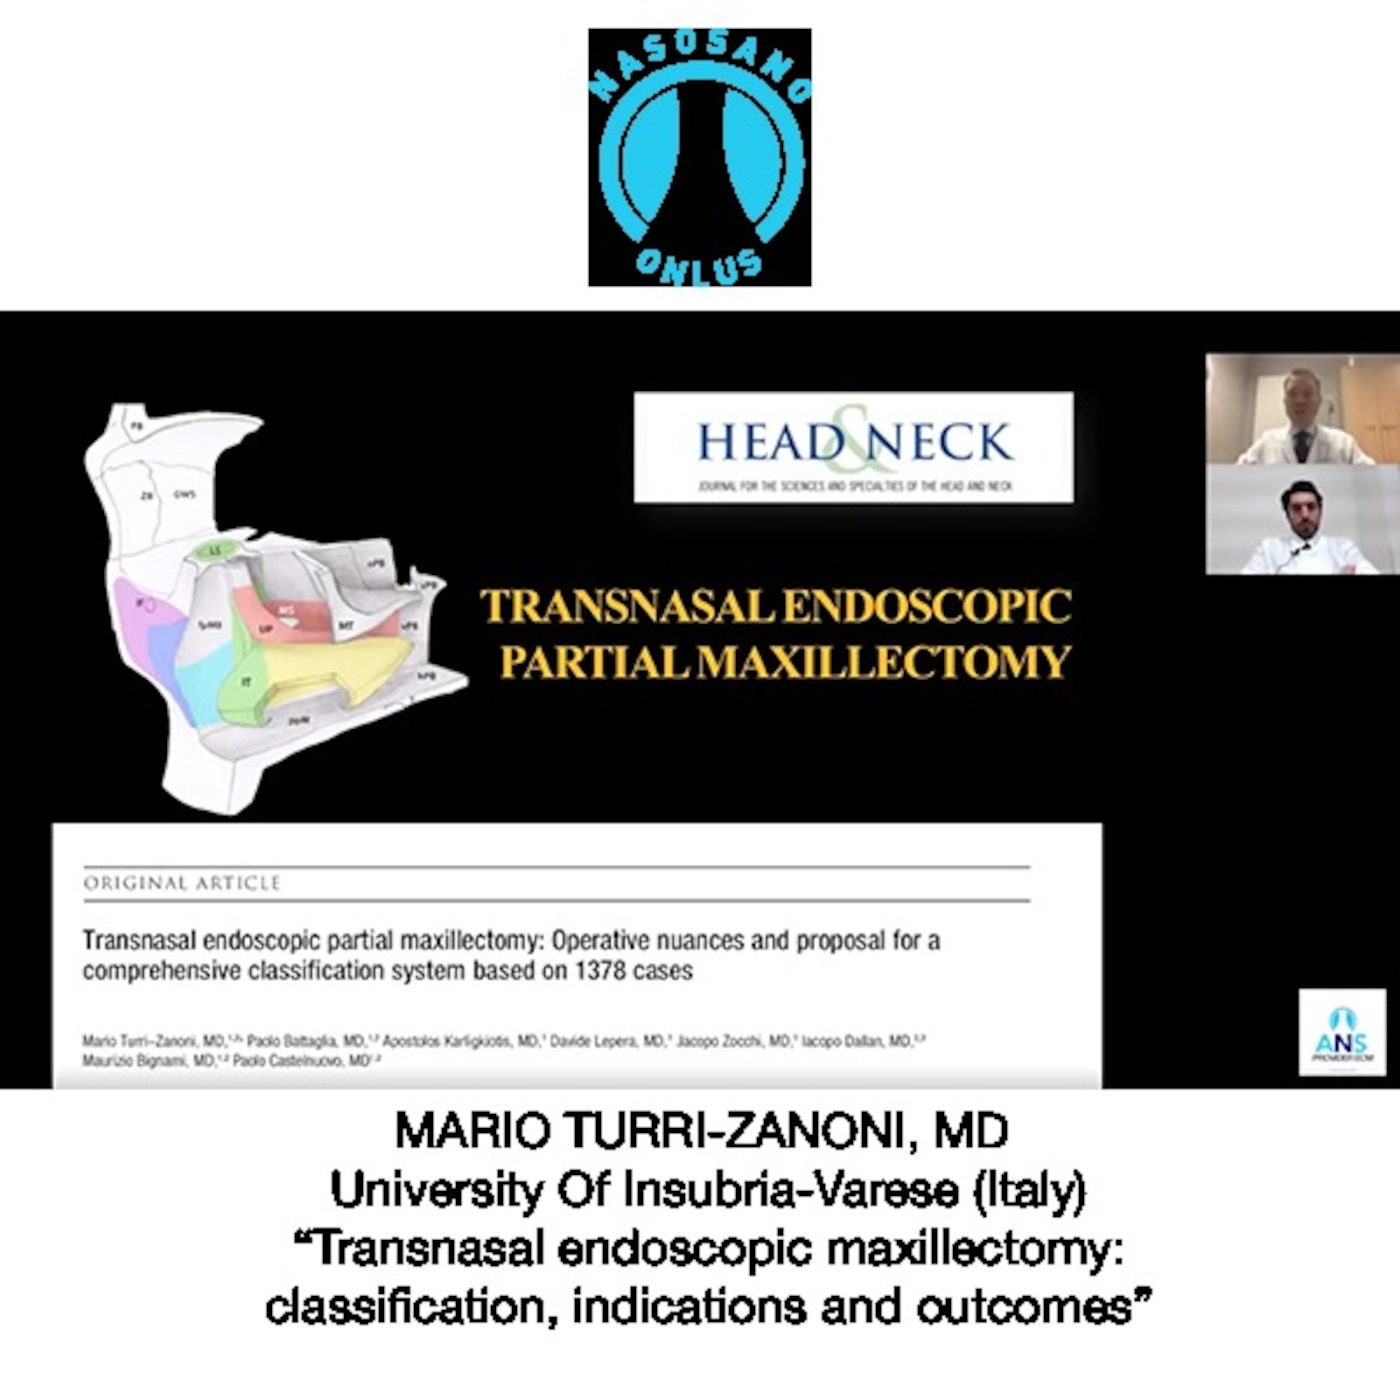 Transnasal endoscopic maxillectomy: classification, indications and outcomes